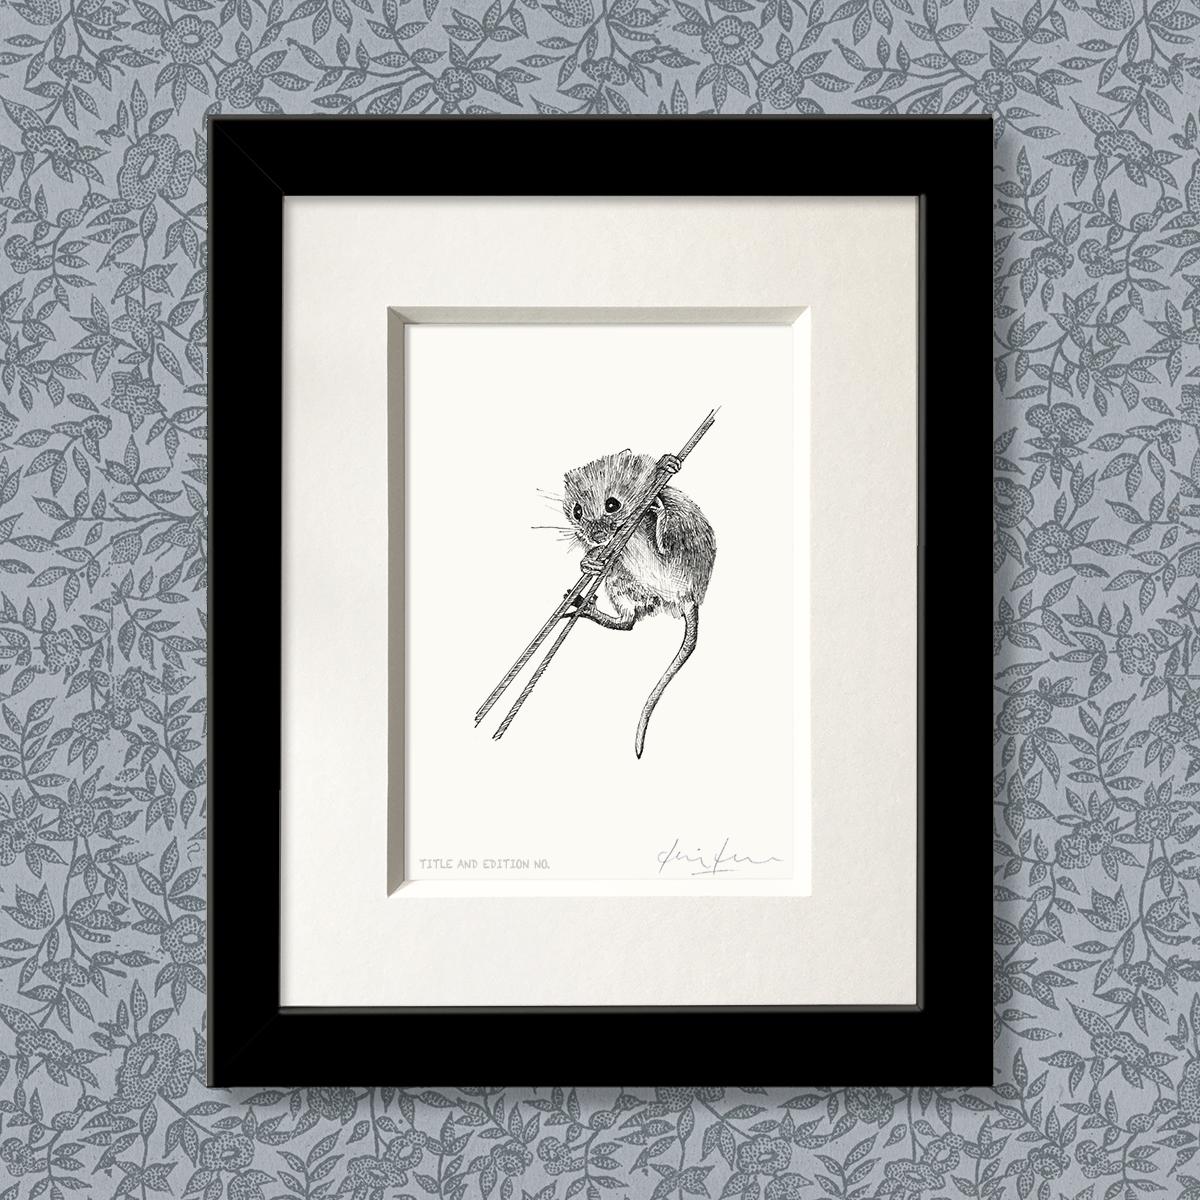 Limited edition print from pen and ink drawing of a harvest mouse in a black frame